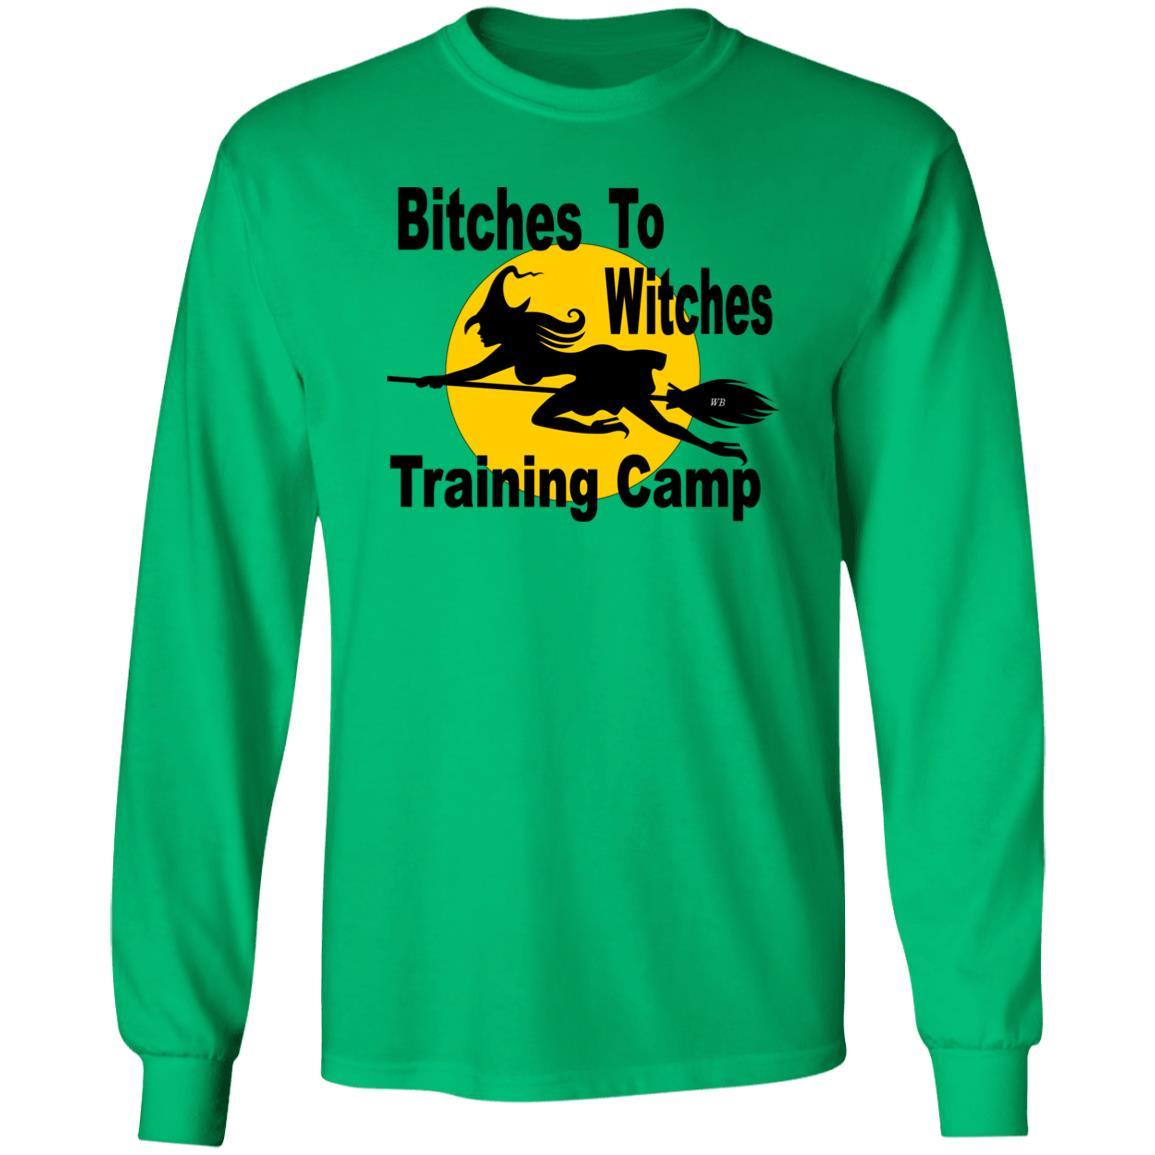 T-Shirts Irish Green / S WineyBitches.Co "Bitches To Witches Training Camp" LS Ultra Cotton T-Shirt WineyBitchesCo